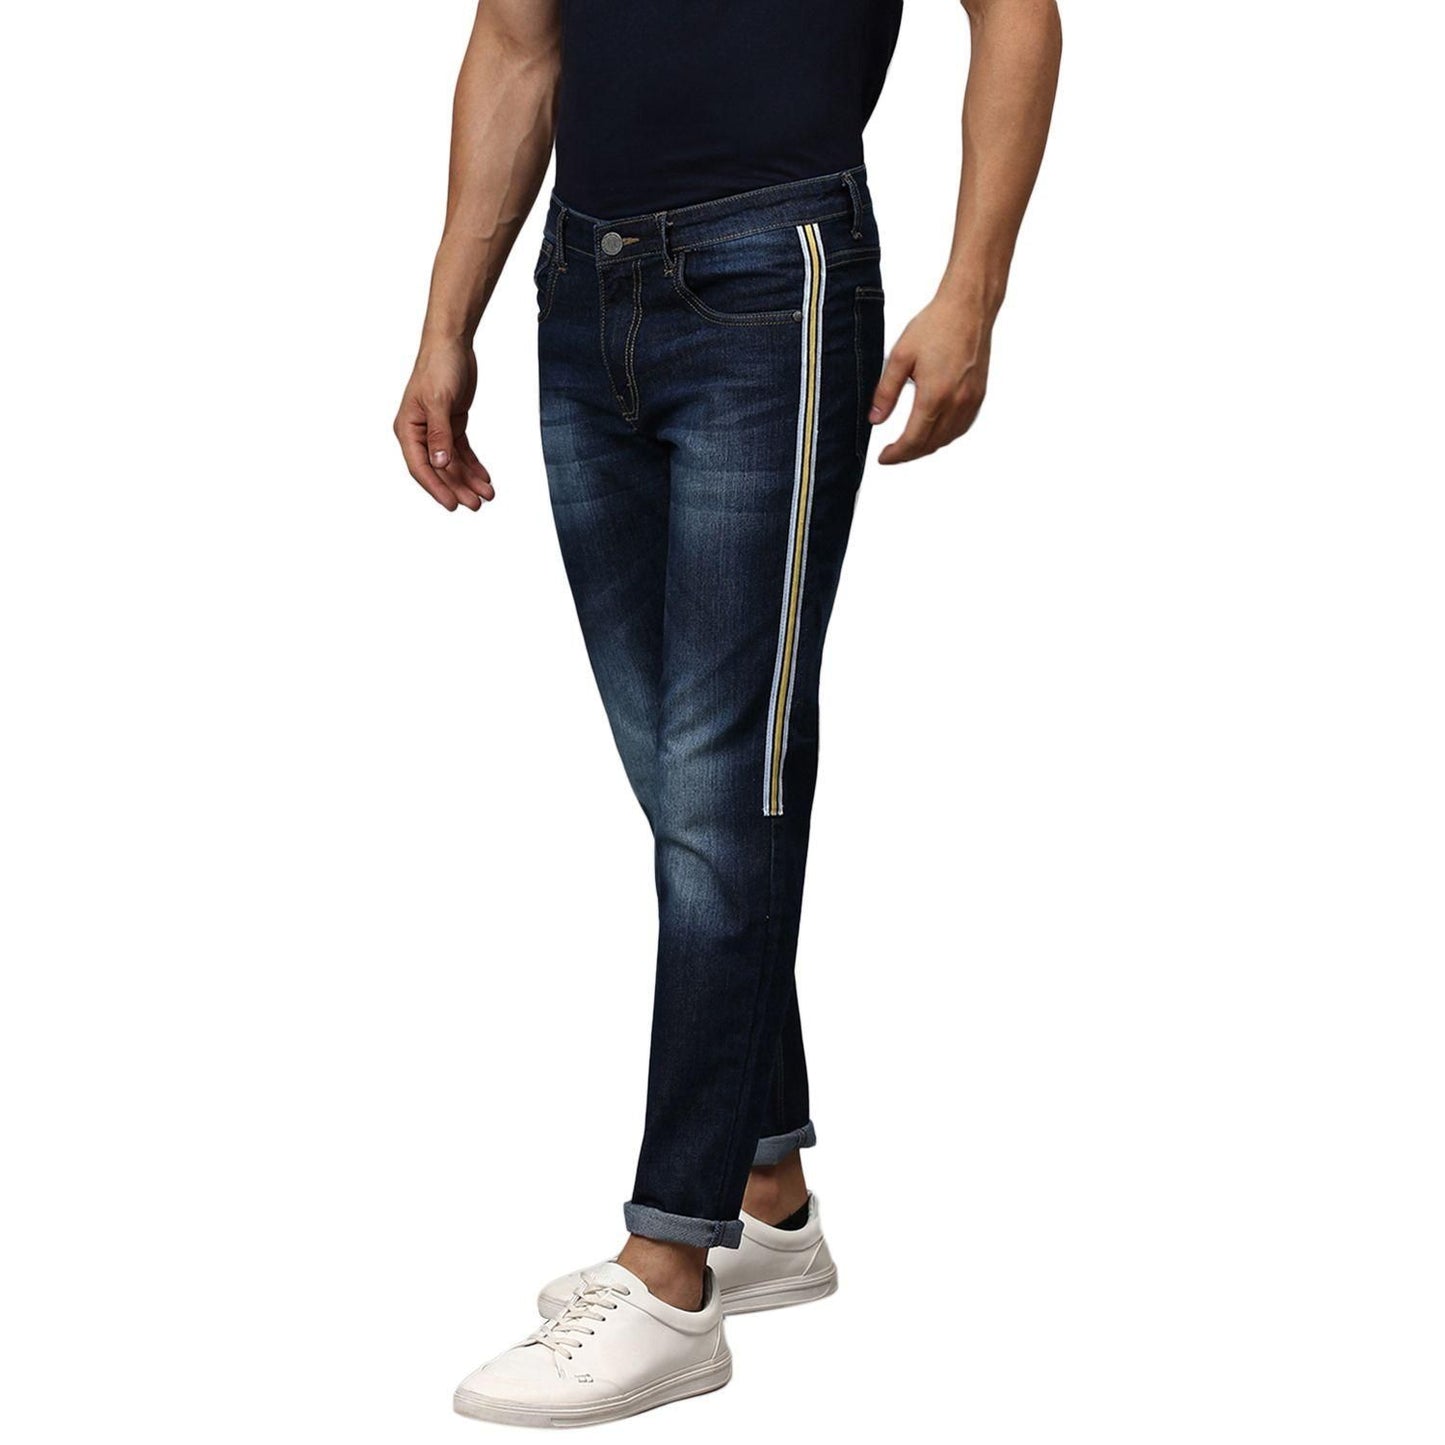 Campus Sutra Denim Washed with Side Tape Slim Fit Jeans